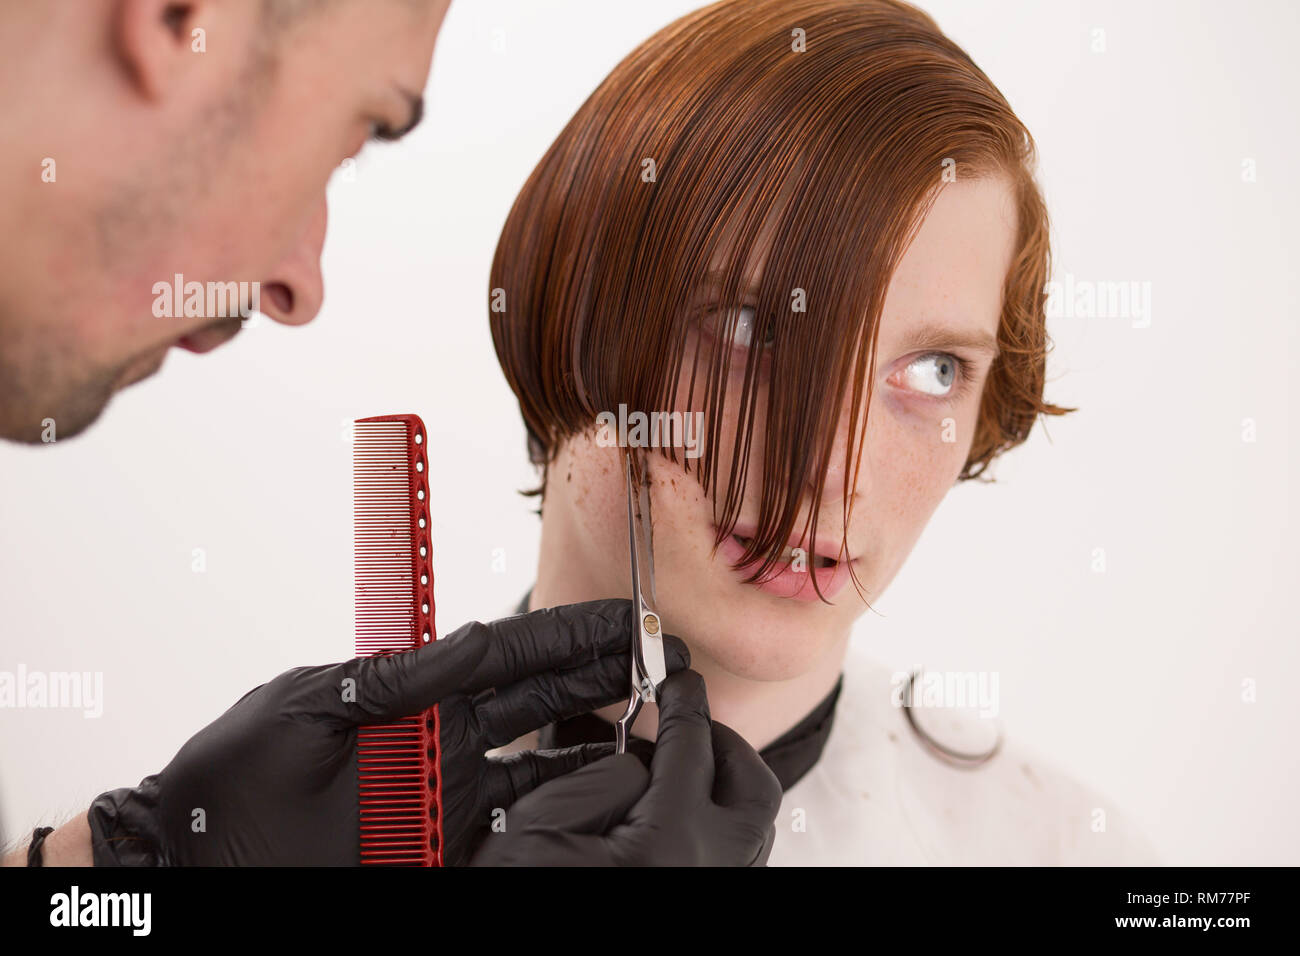 Barber is trimming client's hair with scissors Stock Photo